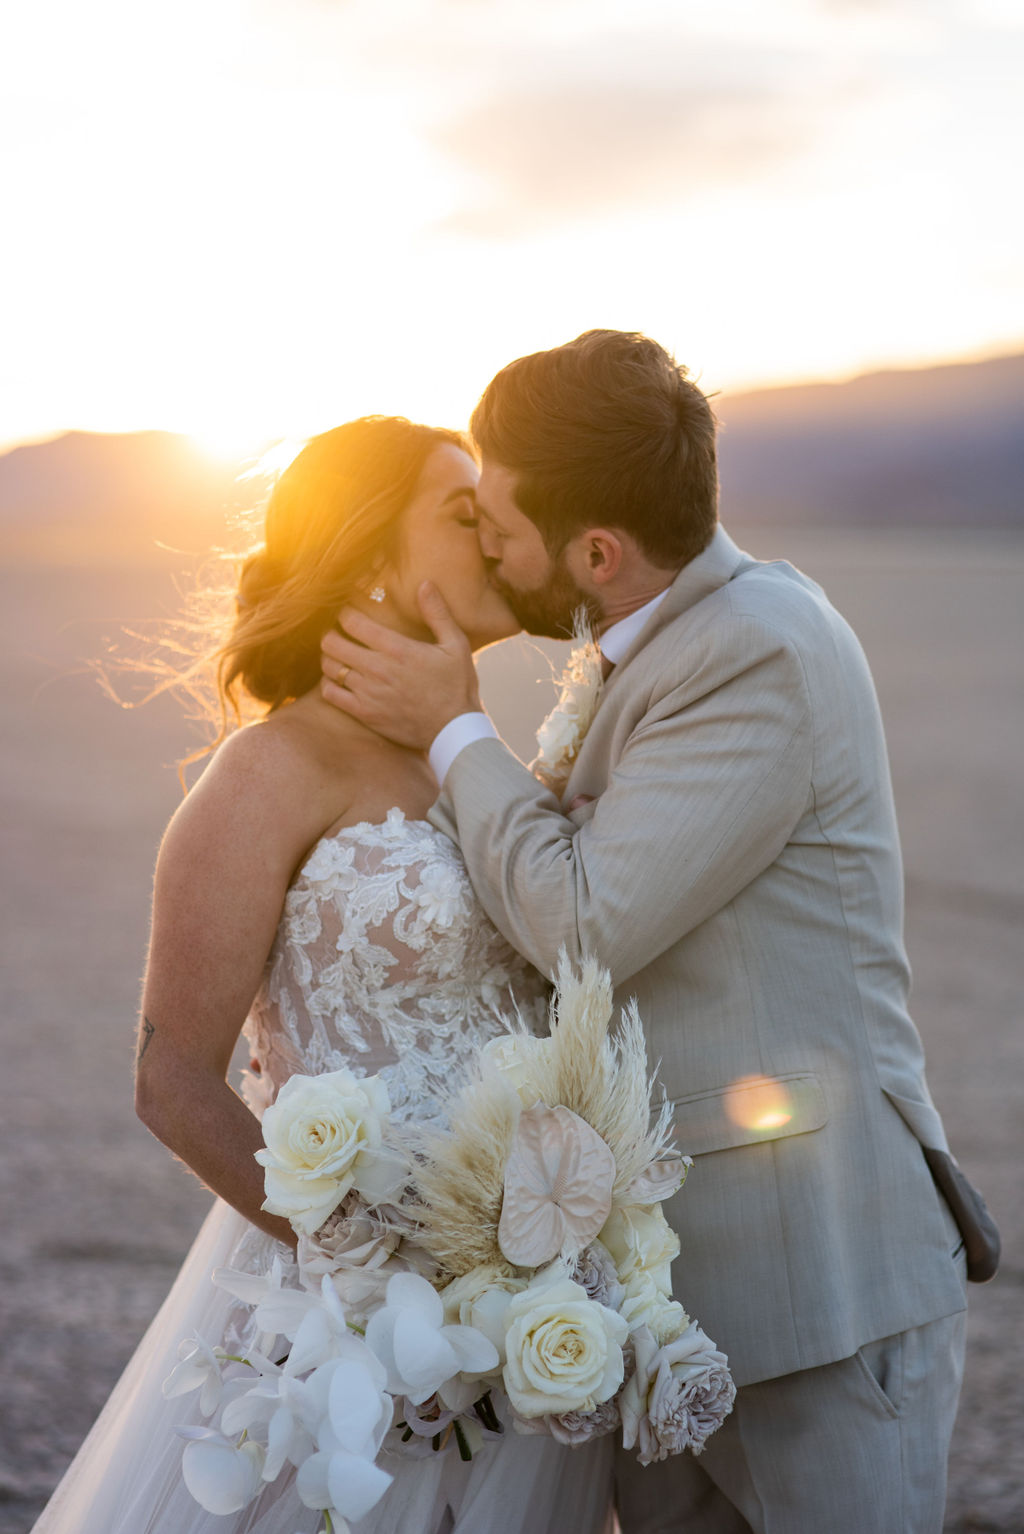 A bride and groom walk hand-in-hand across a dried lakebed with mountains in the distance, the bride holding a bouquet at their dry lake bed wedding